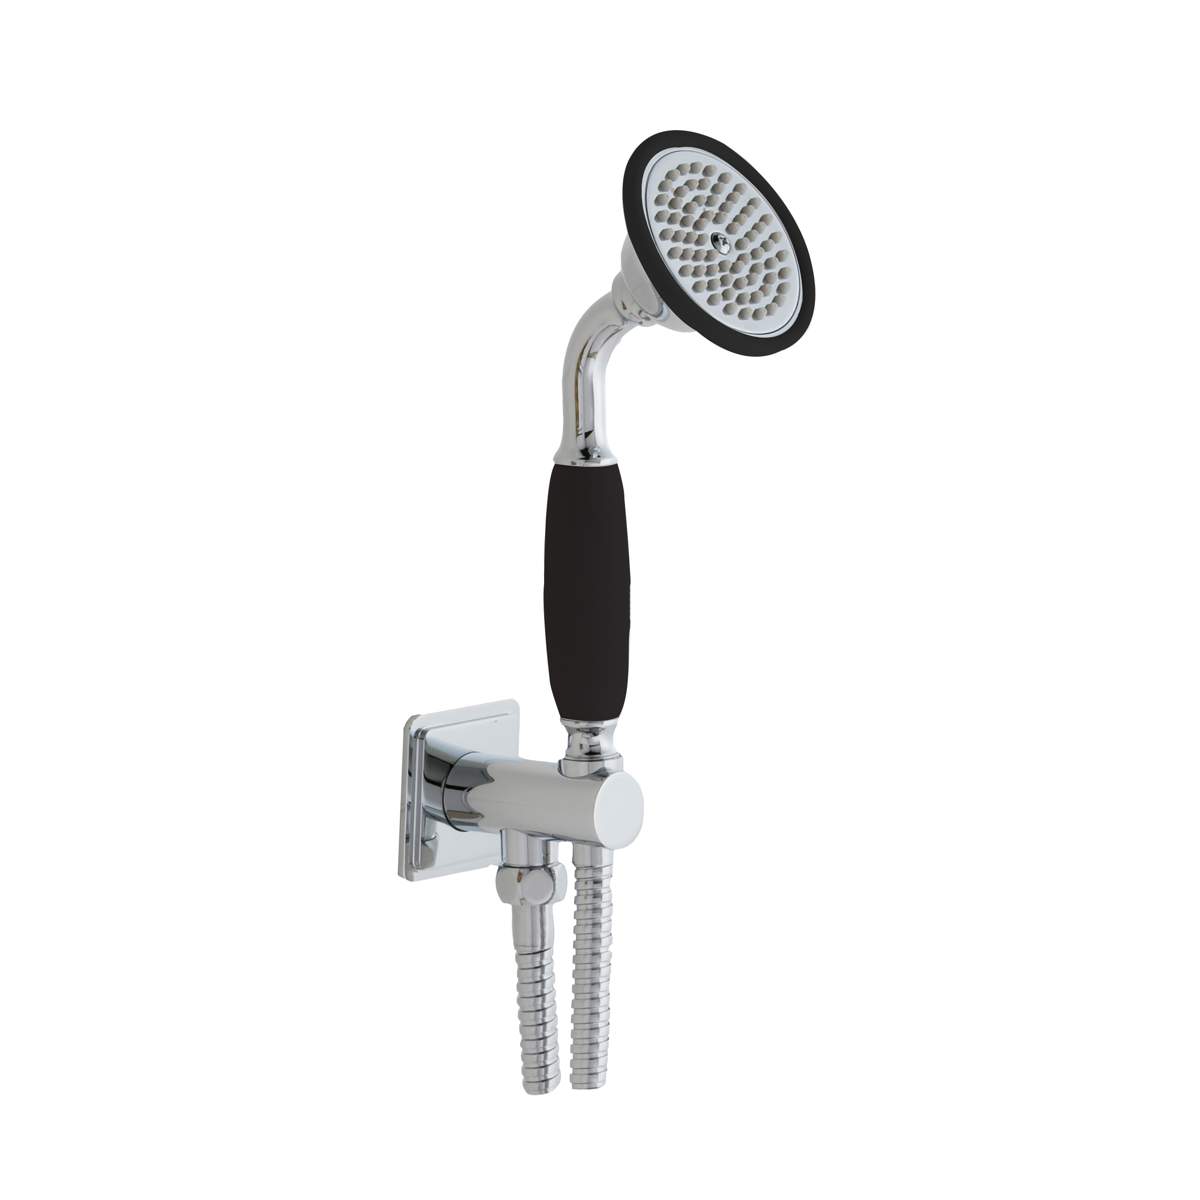 JTP Grosvenor Cross Black Edition Water Outlet Hand Shower (GBTraditional/WS)